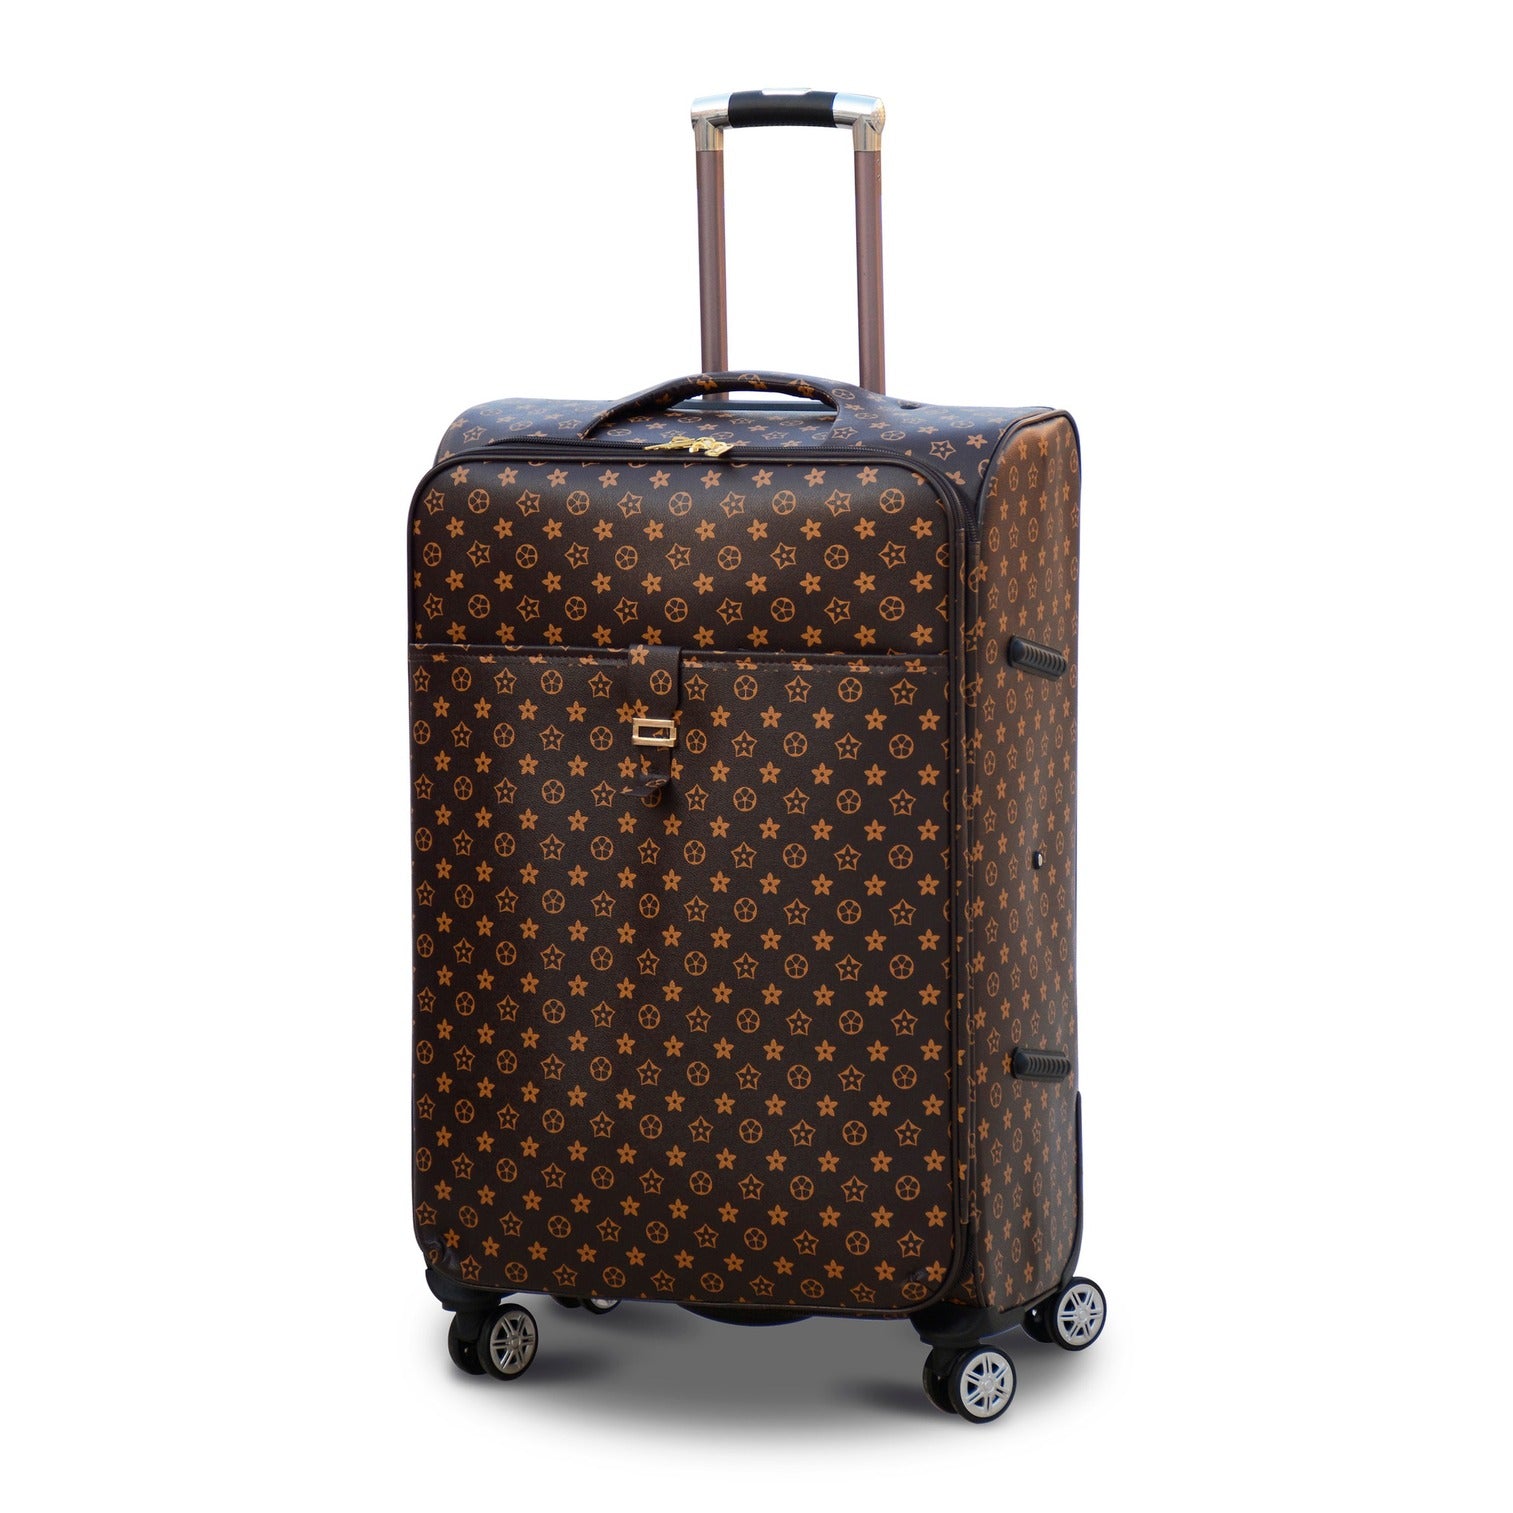 3 Piece Full Set 20" 24" 28 Inches Brown Colour LVR PU Leather Luggage Lightweight Soft Material Trolley Bag with Spinner Wheel Zaappy.com